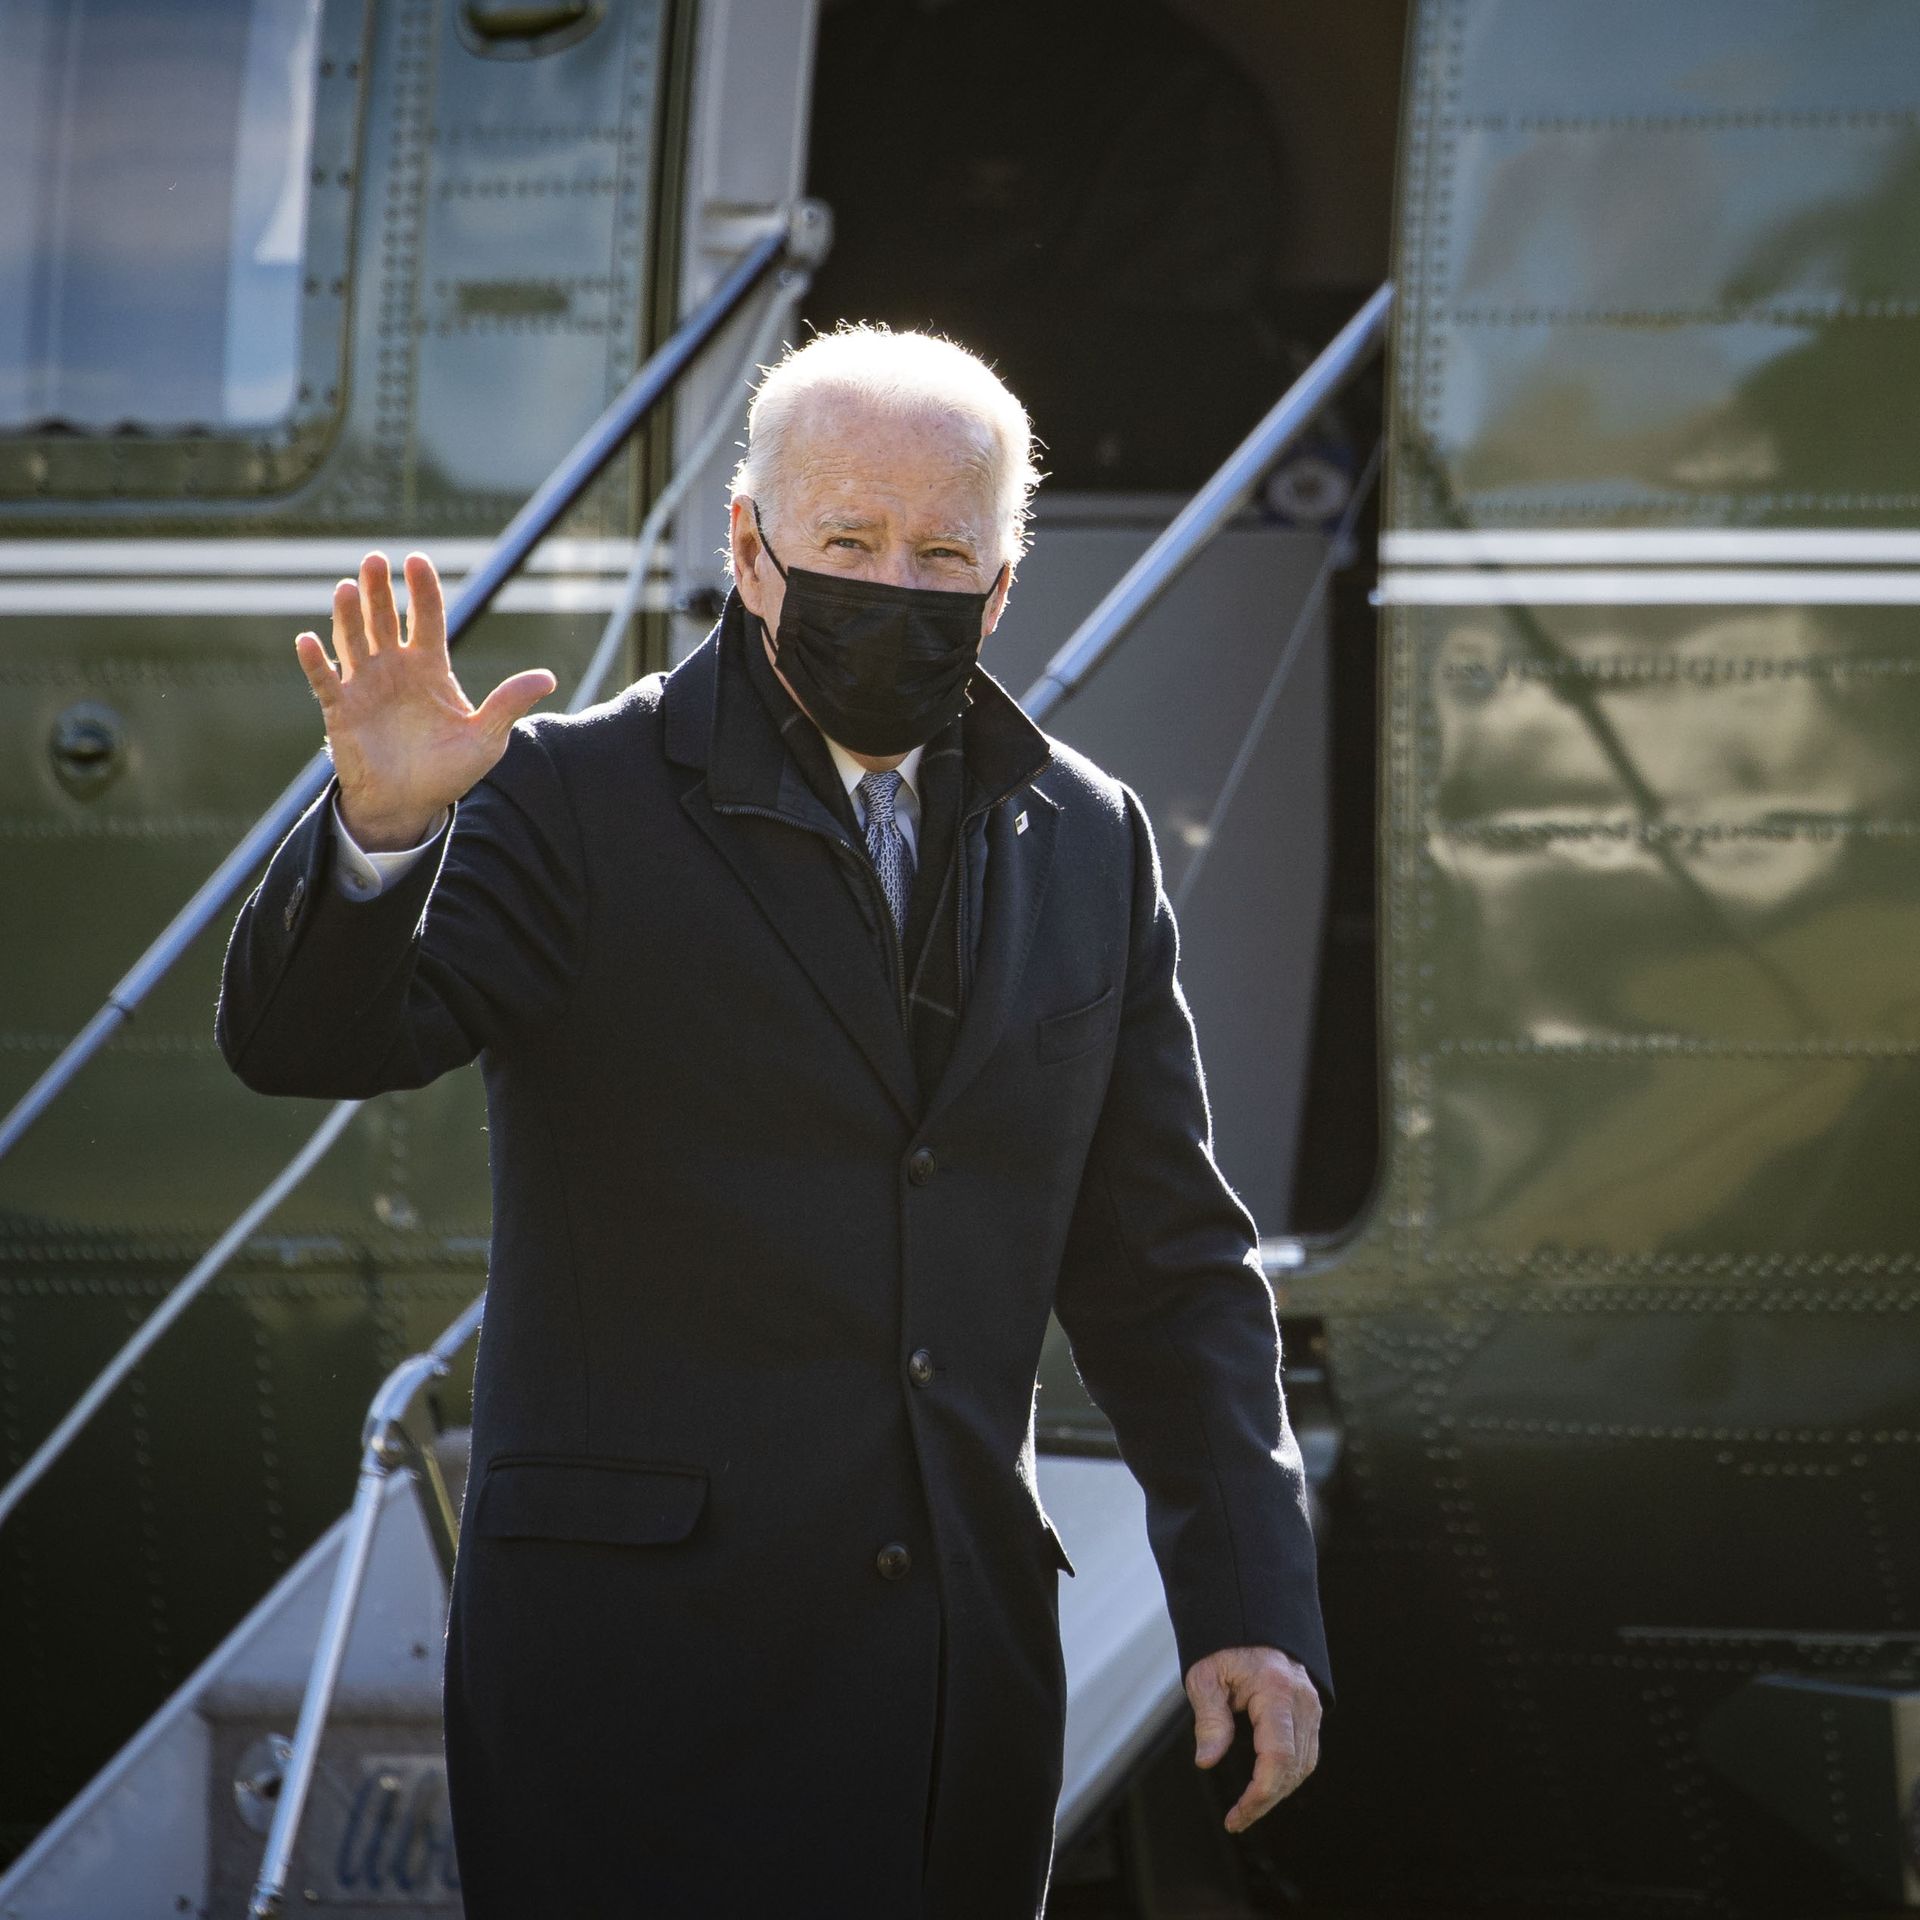 President Joe Biden waves while walking on the South Lawn of the White House after arriving on Marine One.